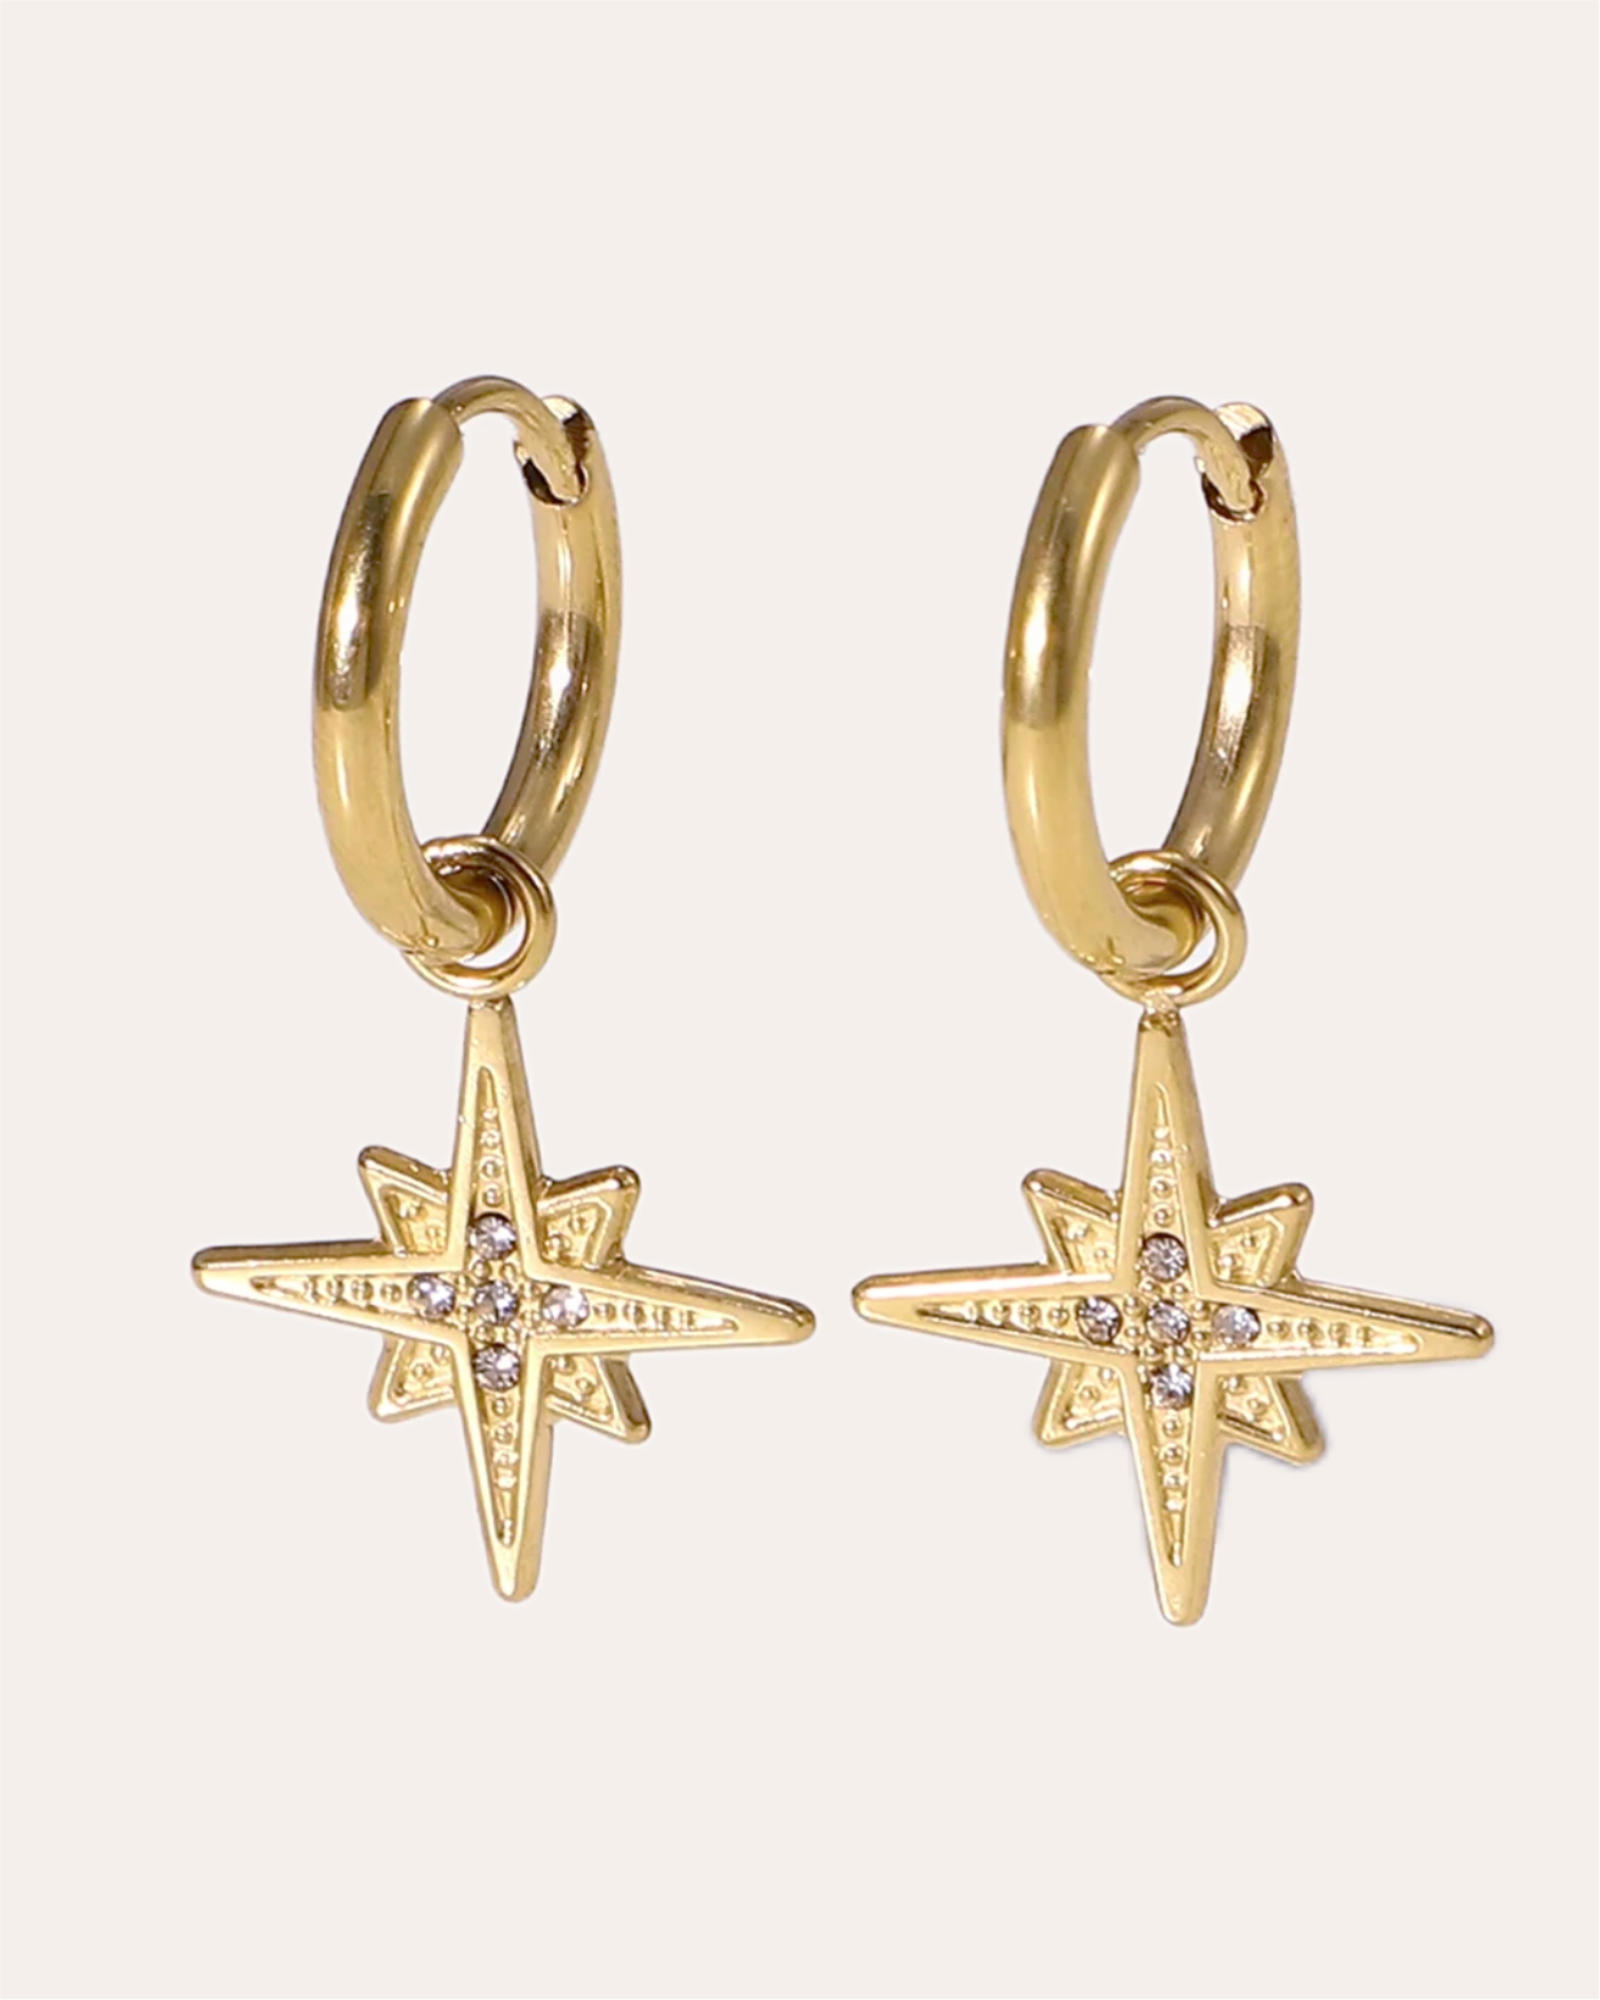 Shiny gold star charm earrings with sparkling zircon accents.